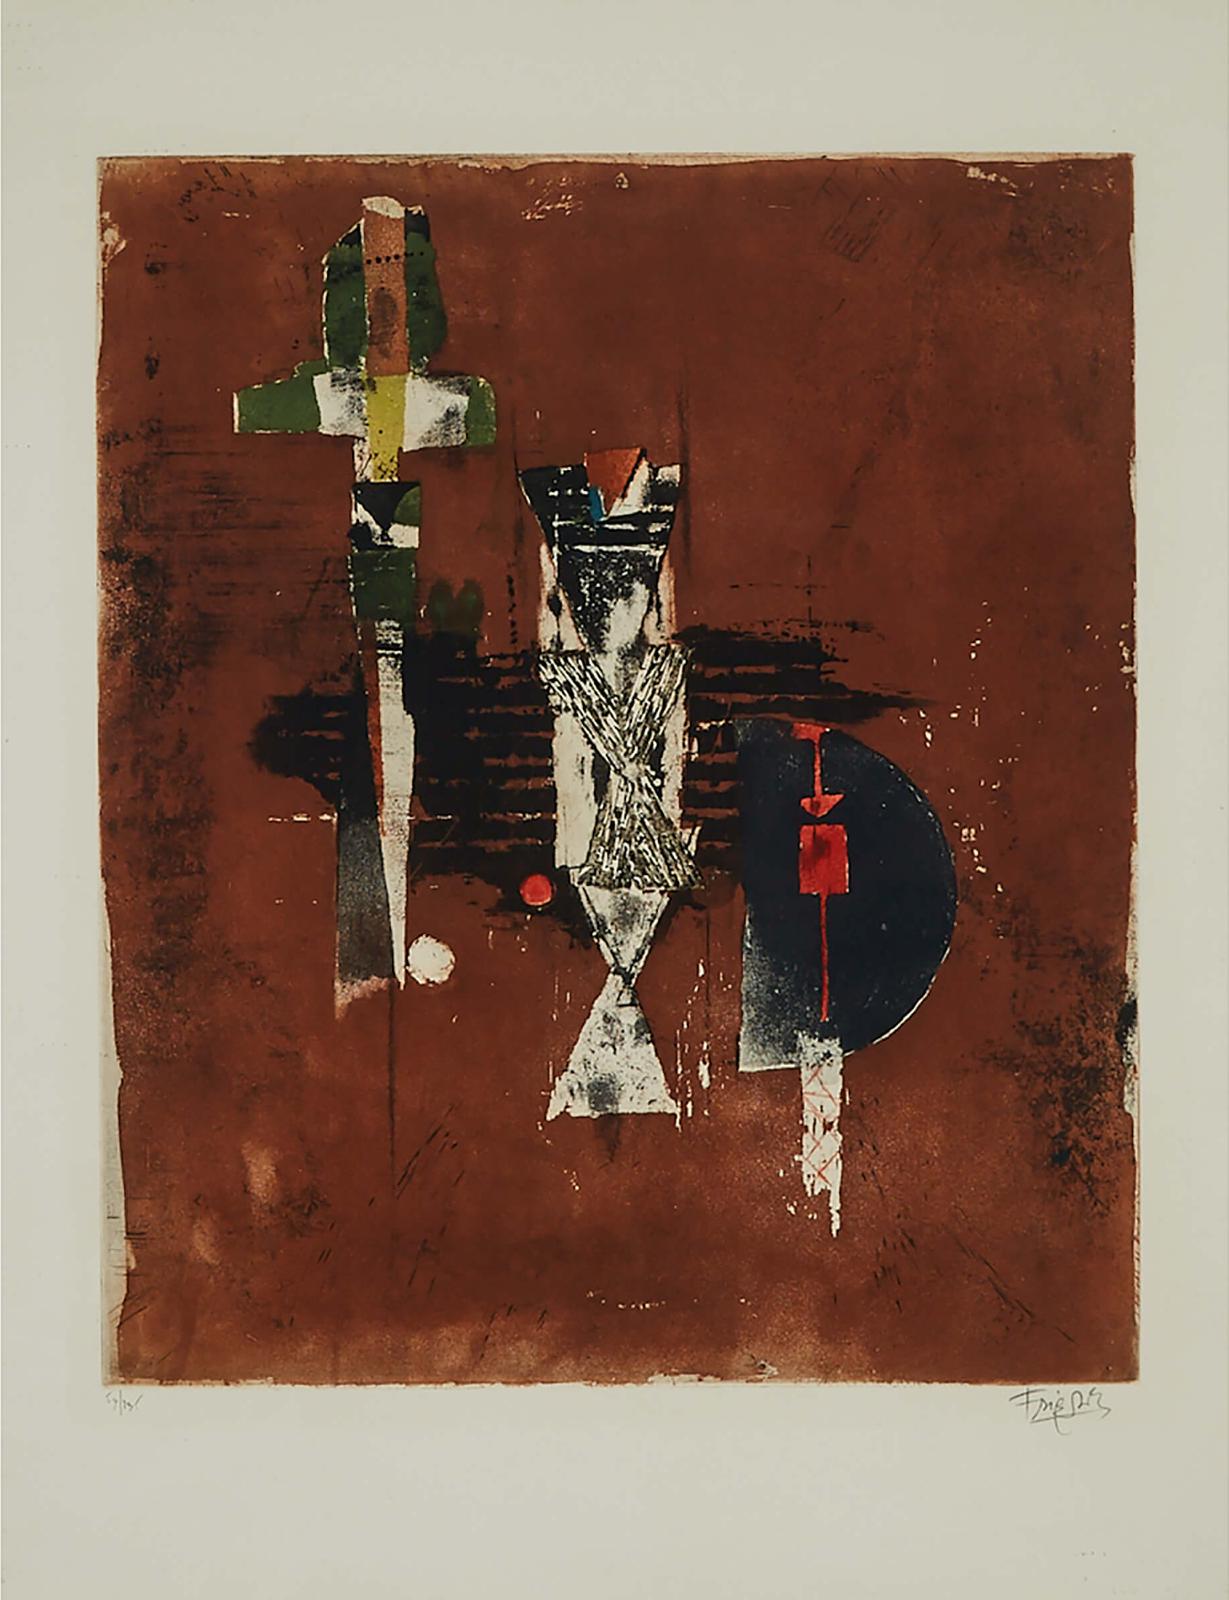 Johnny Friedlaender (1912-1992) - Untitled (From Six Palettes), 1976 [schmuecking, 522-547 Series]